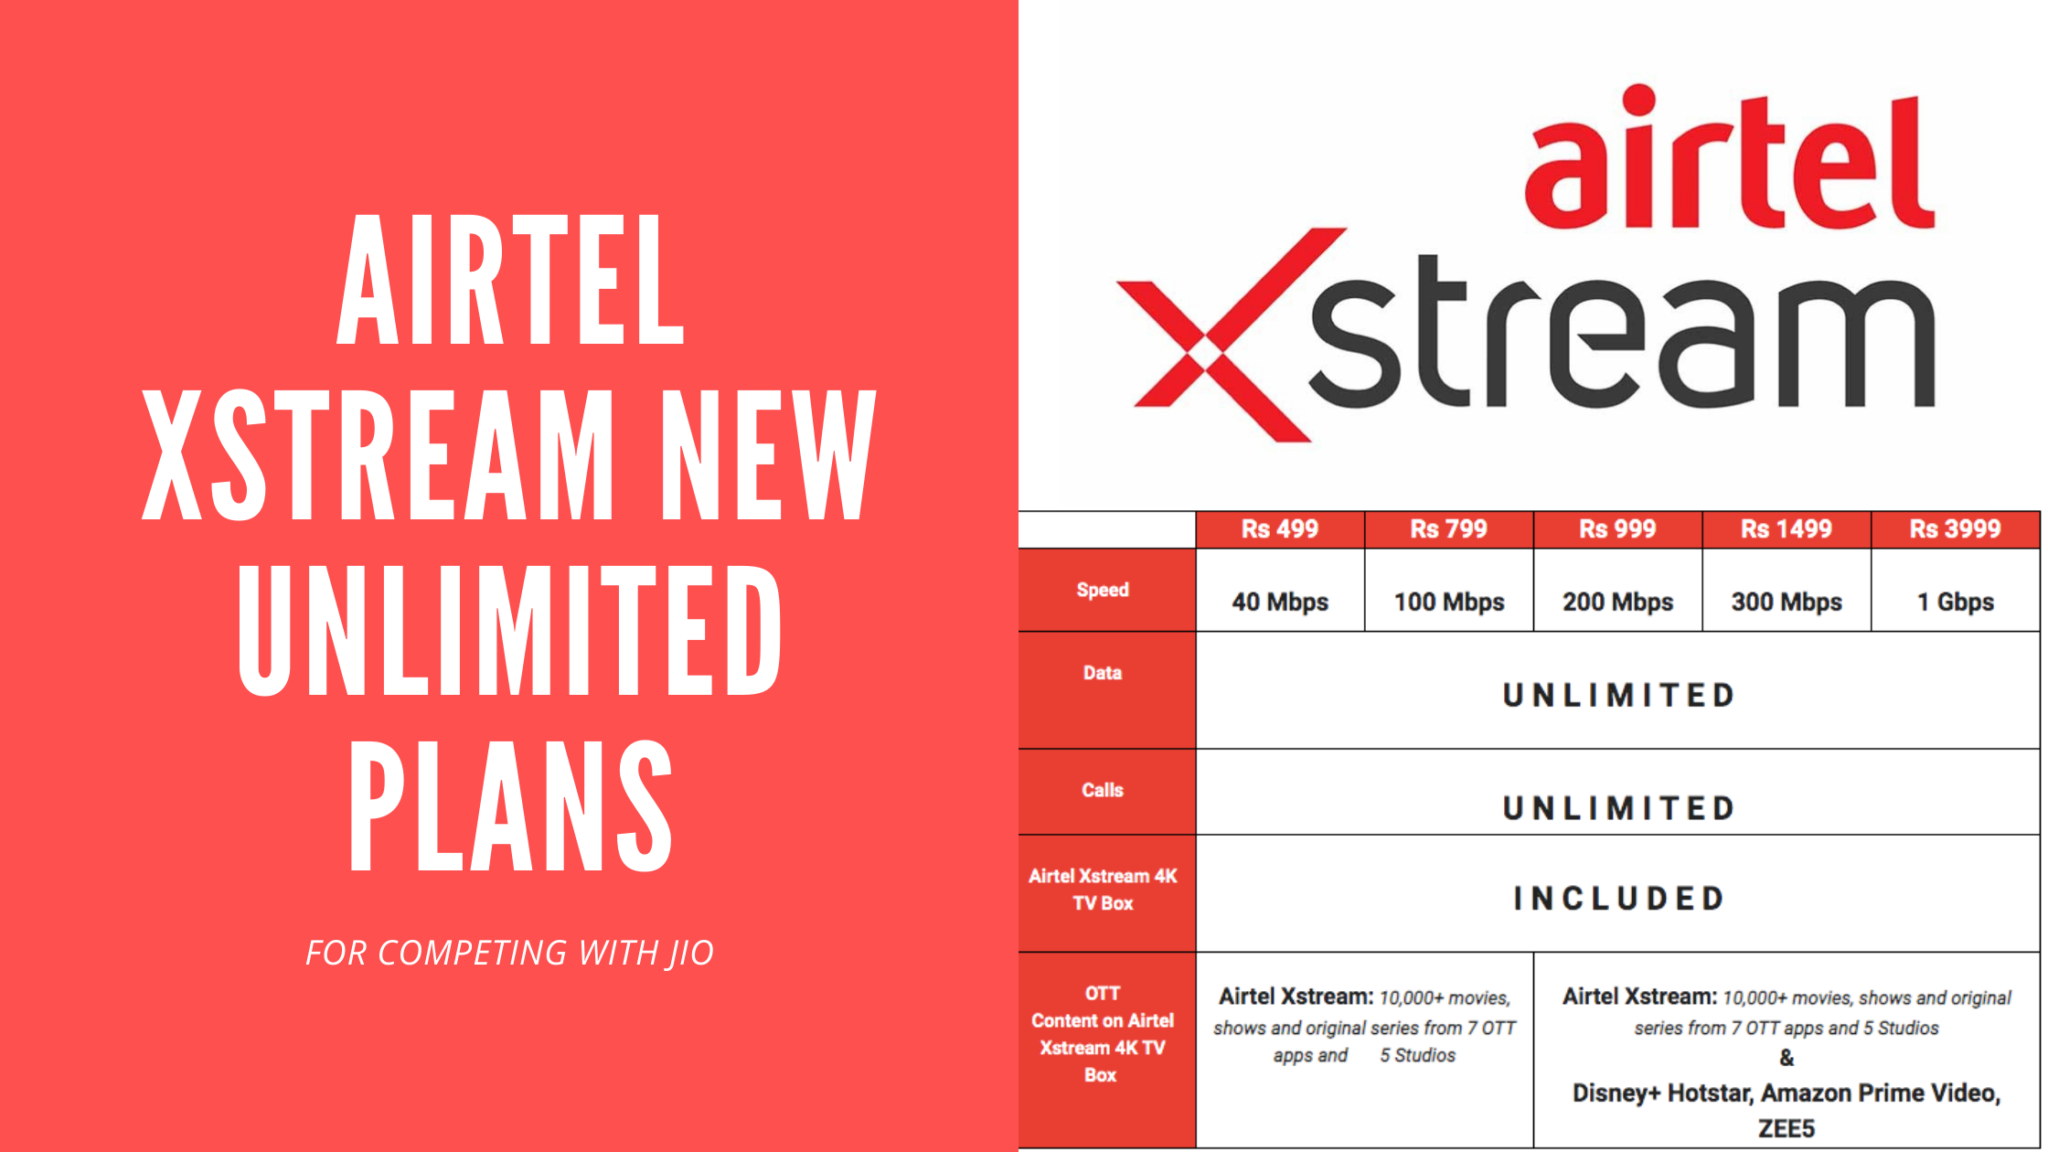 Airtel launches new Xstream Fiber Unlimited Plans to compete with JioFiber